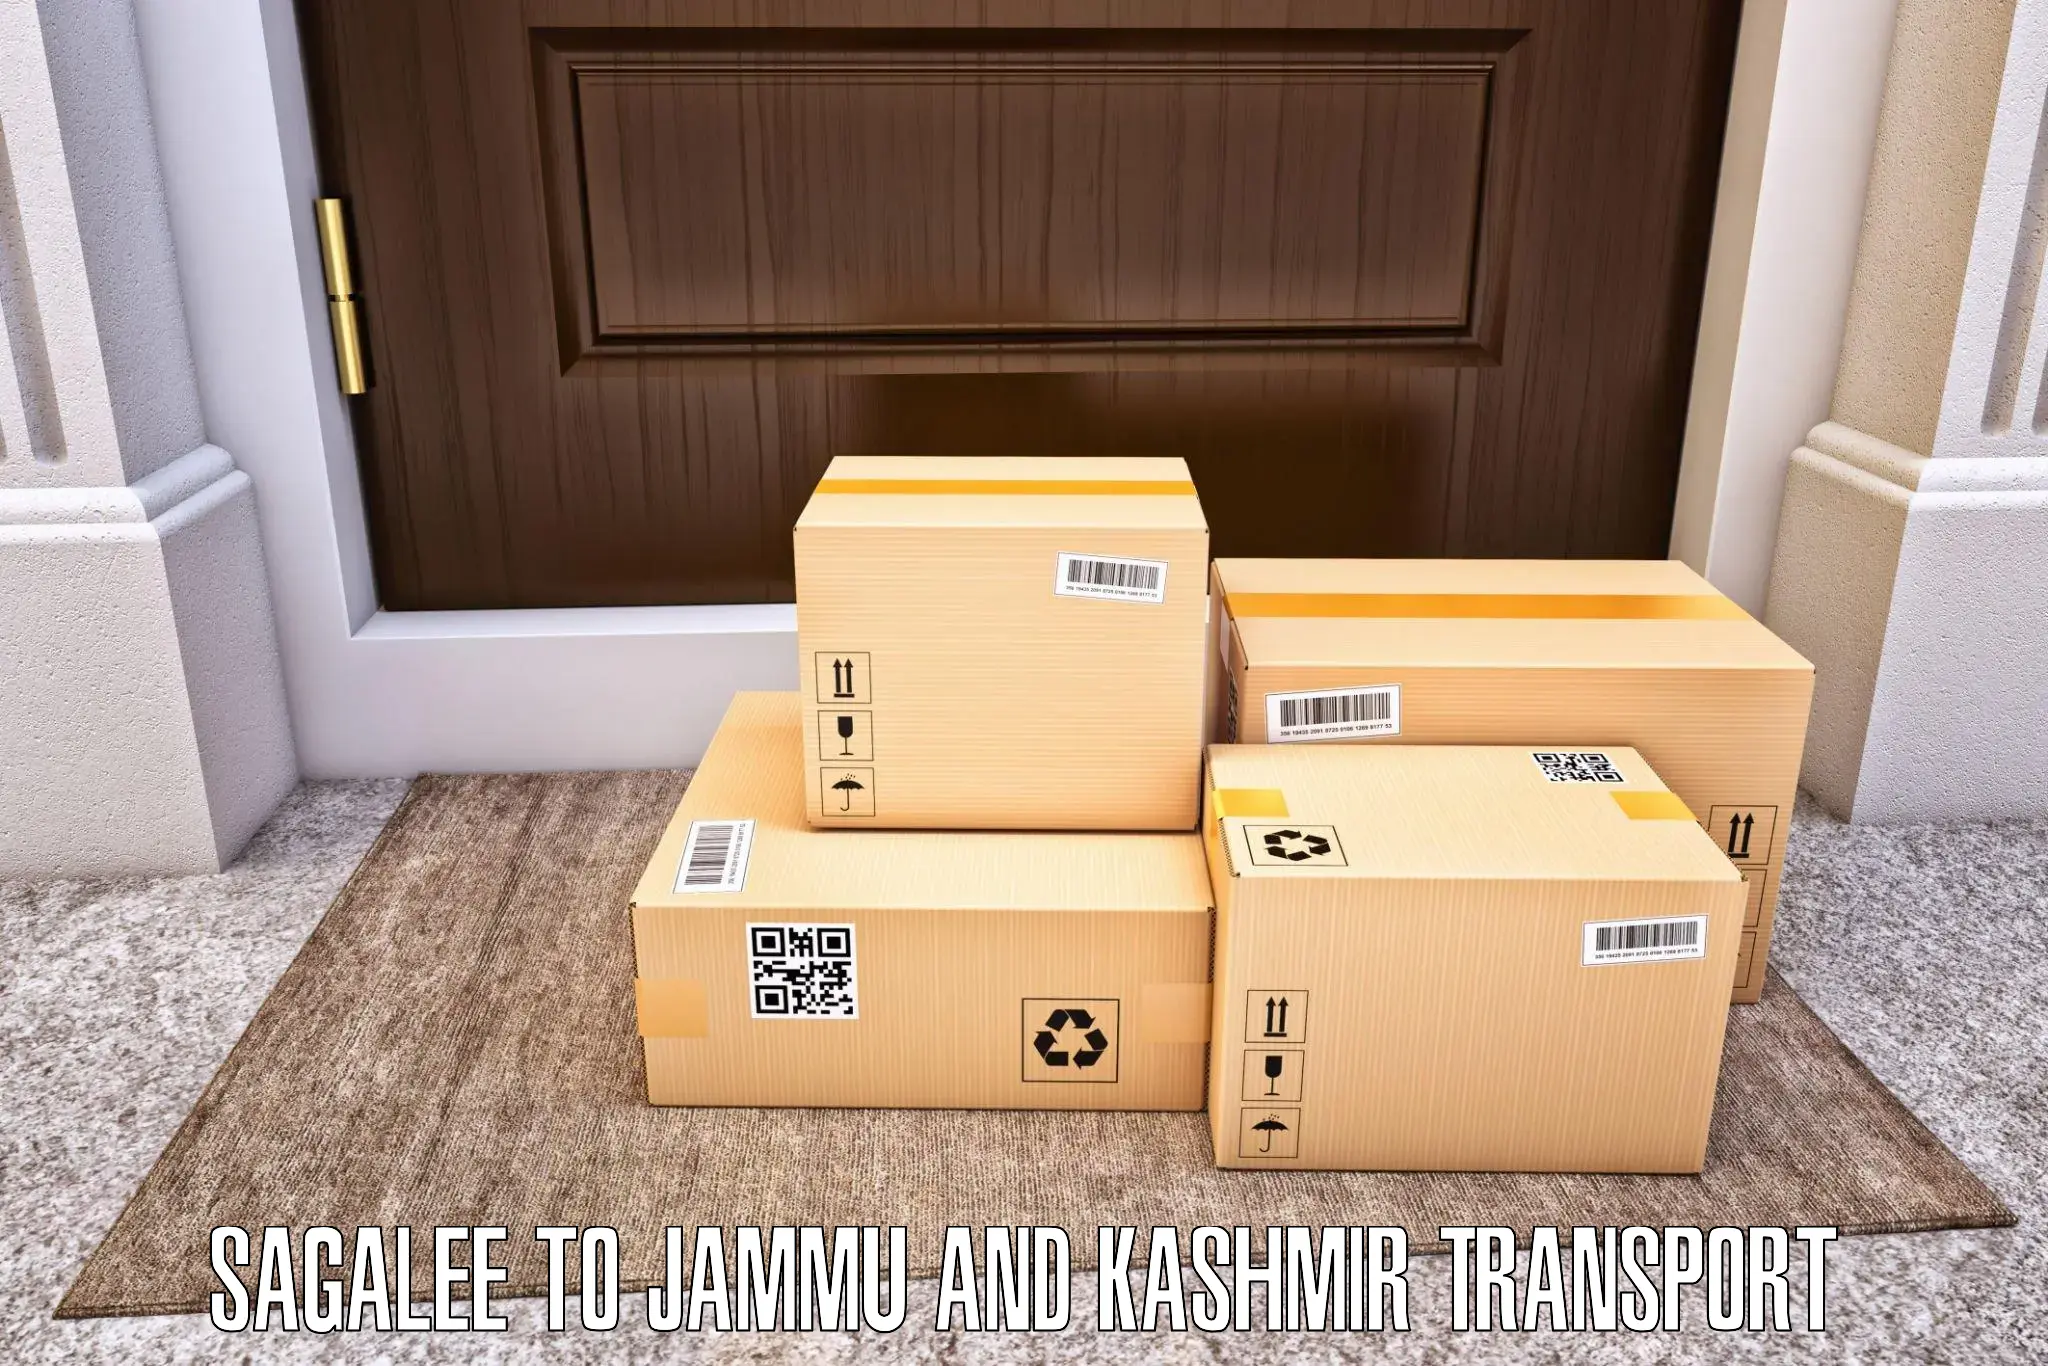 Vehicle transport services Sagalee to Pulwama